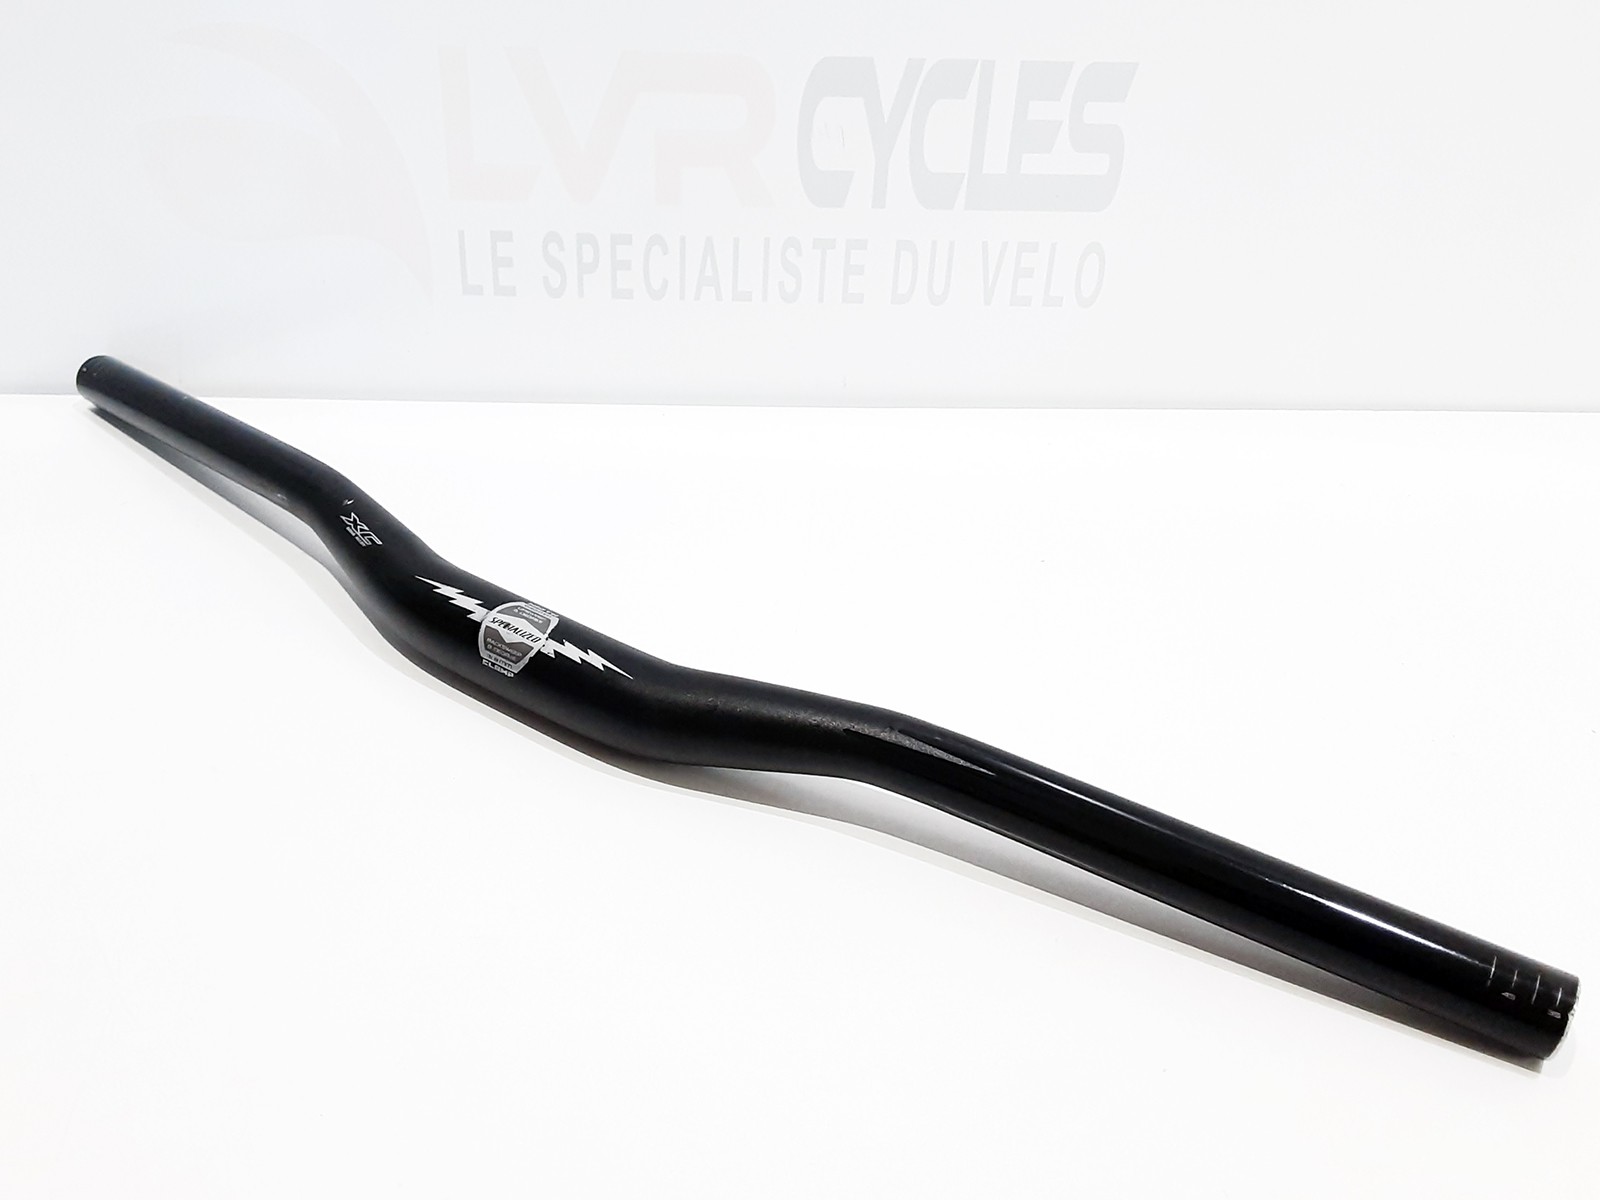 SPECIALIZED XC 6066 second-hand MTB Handlebar